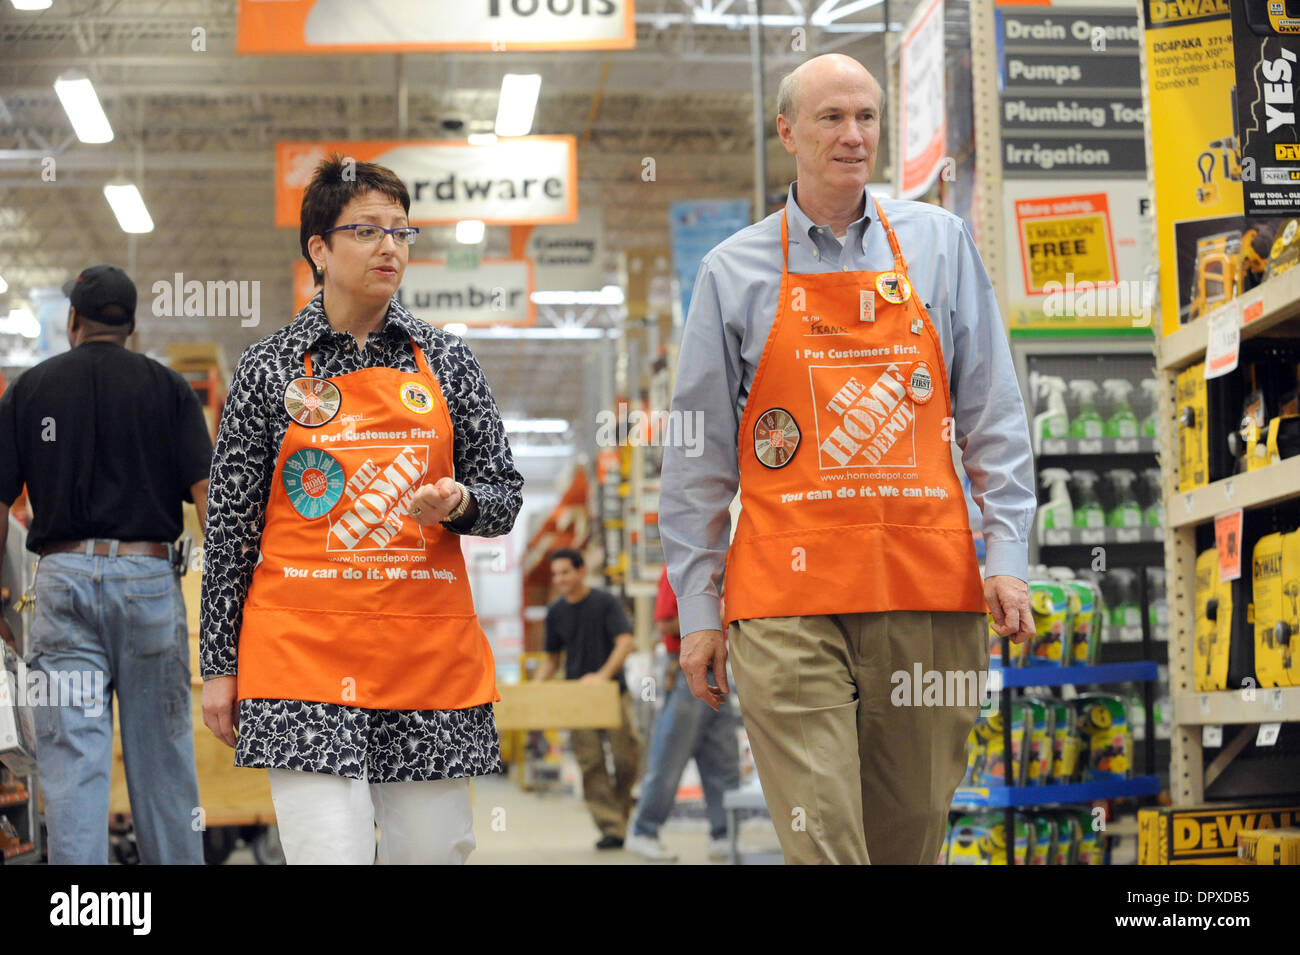 Apr 29, 2009 - Atlanta, Georgia, USA - The Home Depot Inc. posted a 44 percent increase in its first-quarter profit on Tuesday. PICTURED: The Home Depot CEO and Chairman FRANK BLAKE, right, and CFO CAROL TOME at one of the company's stores in Atlanta, Georgia on Wednesday, April 29, 2009.  (Credit Image: © Erik Lesser/ZUMA Press) Stock Photo